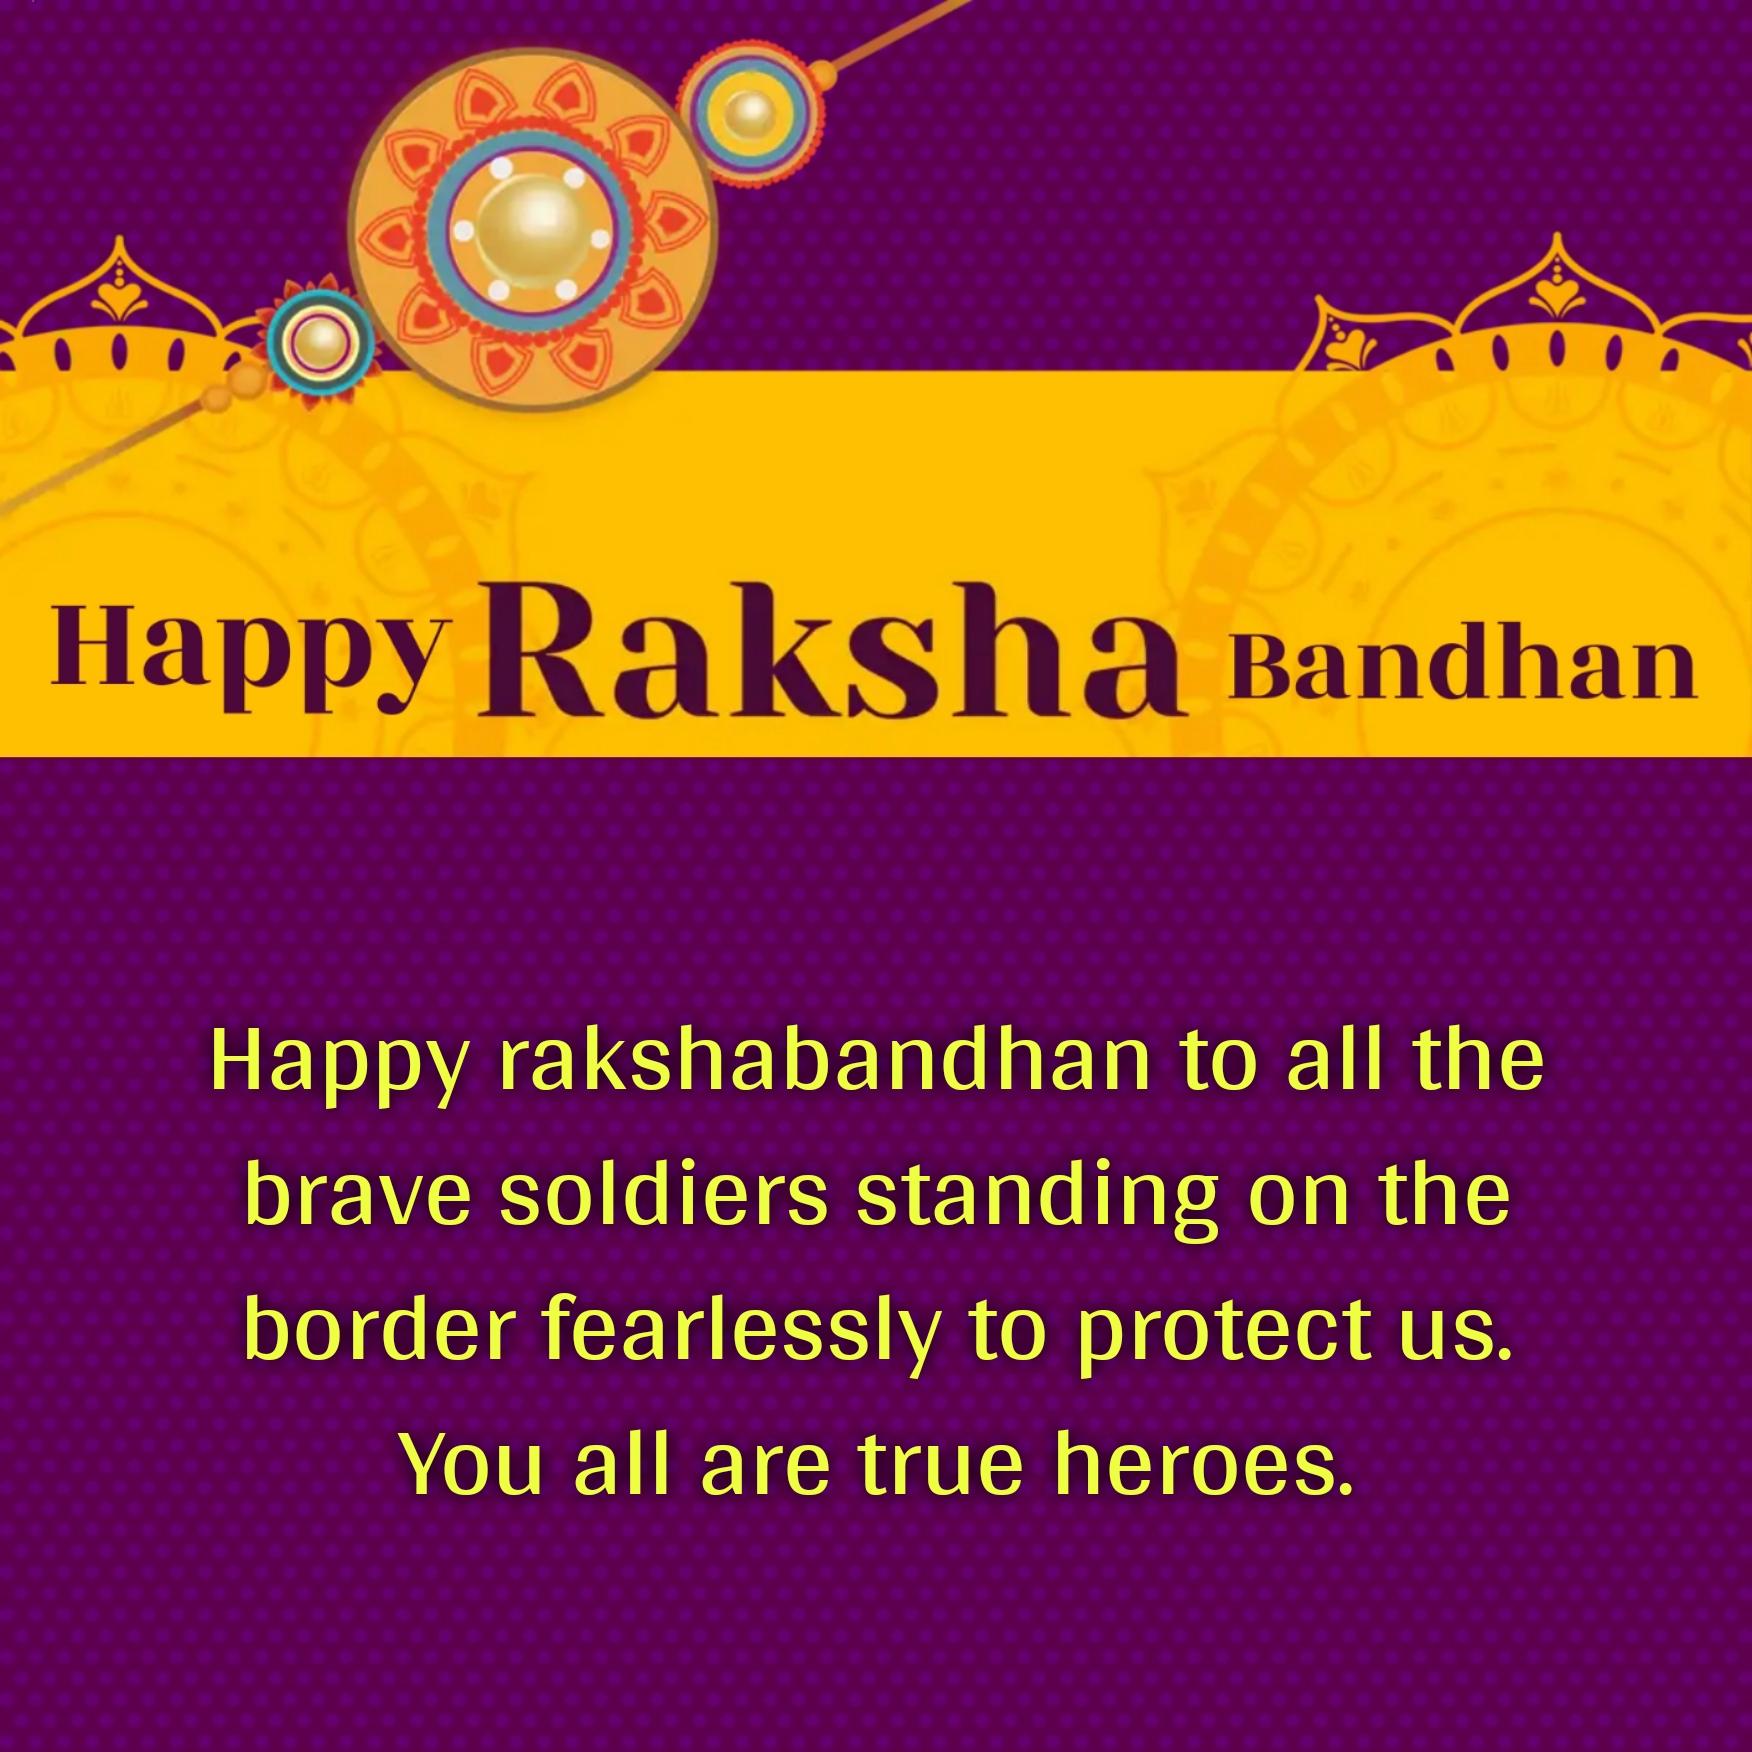 Happy rakshabandhan to all the brave soldiers standing on the border